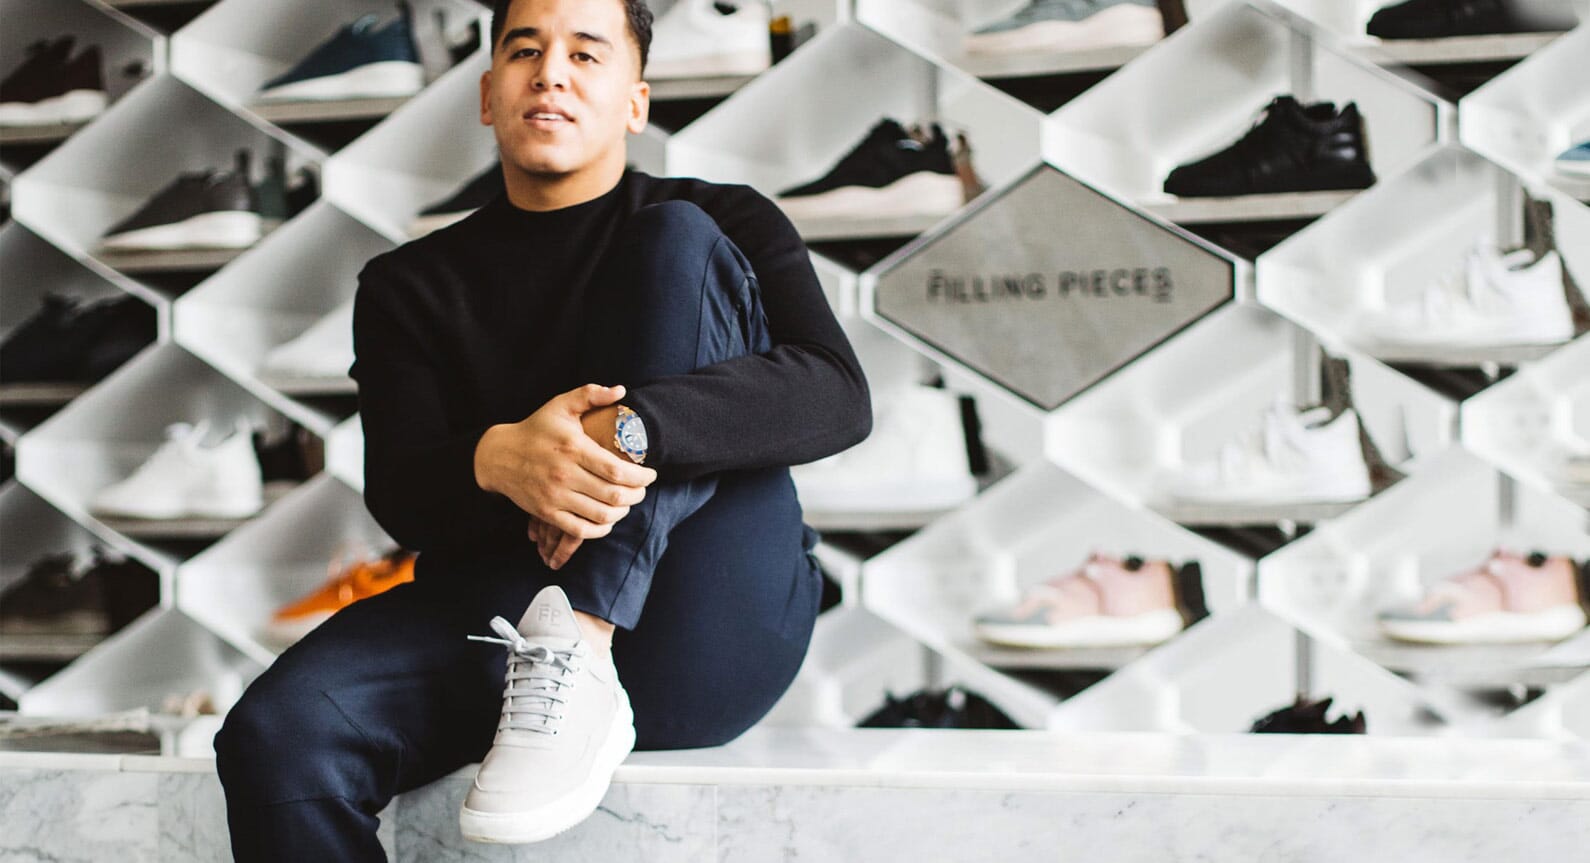 My Life In Sneakers: Filling Pieces Founder Guillaume Philibert | OPUMO  Magazine